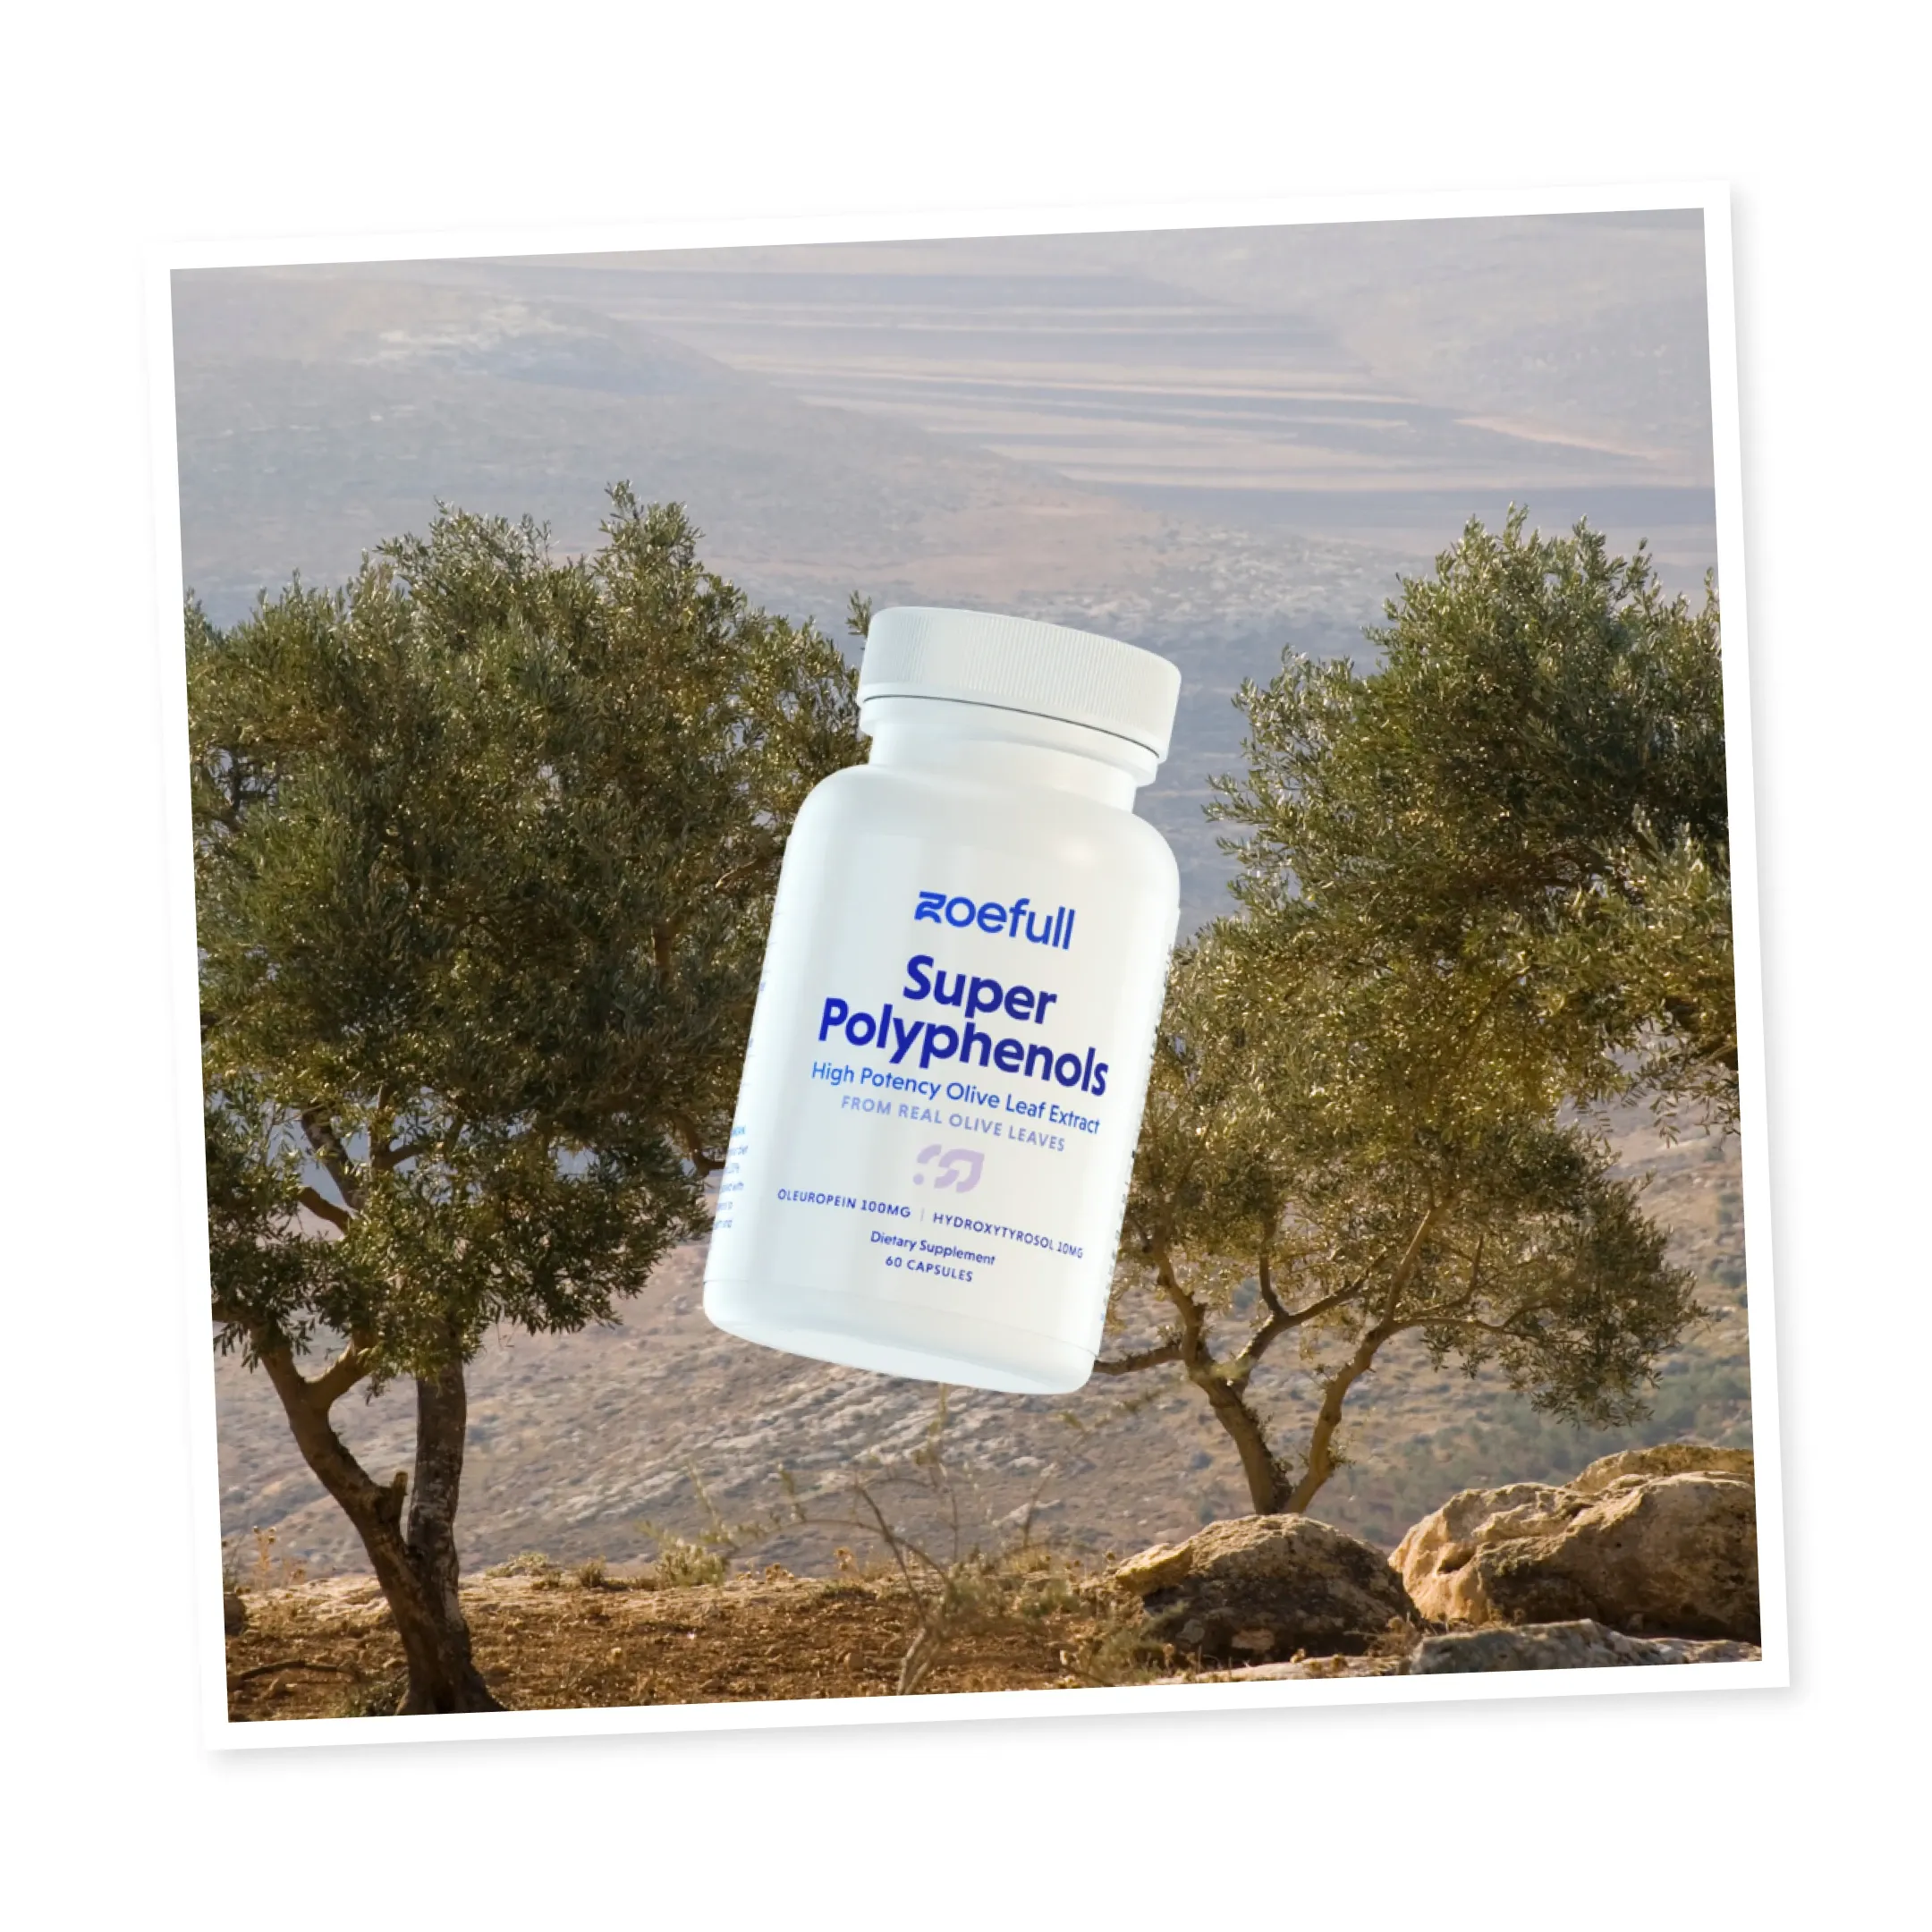 A picture showcasing zoefull's super polyphenol supplement in front of olive trees.